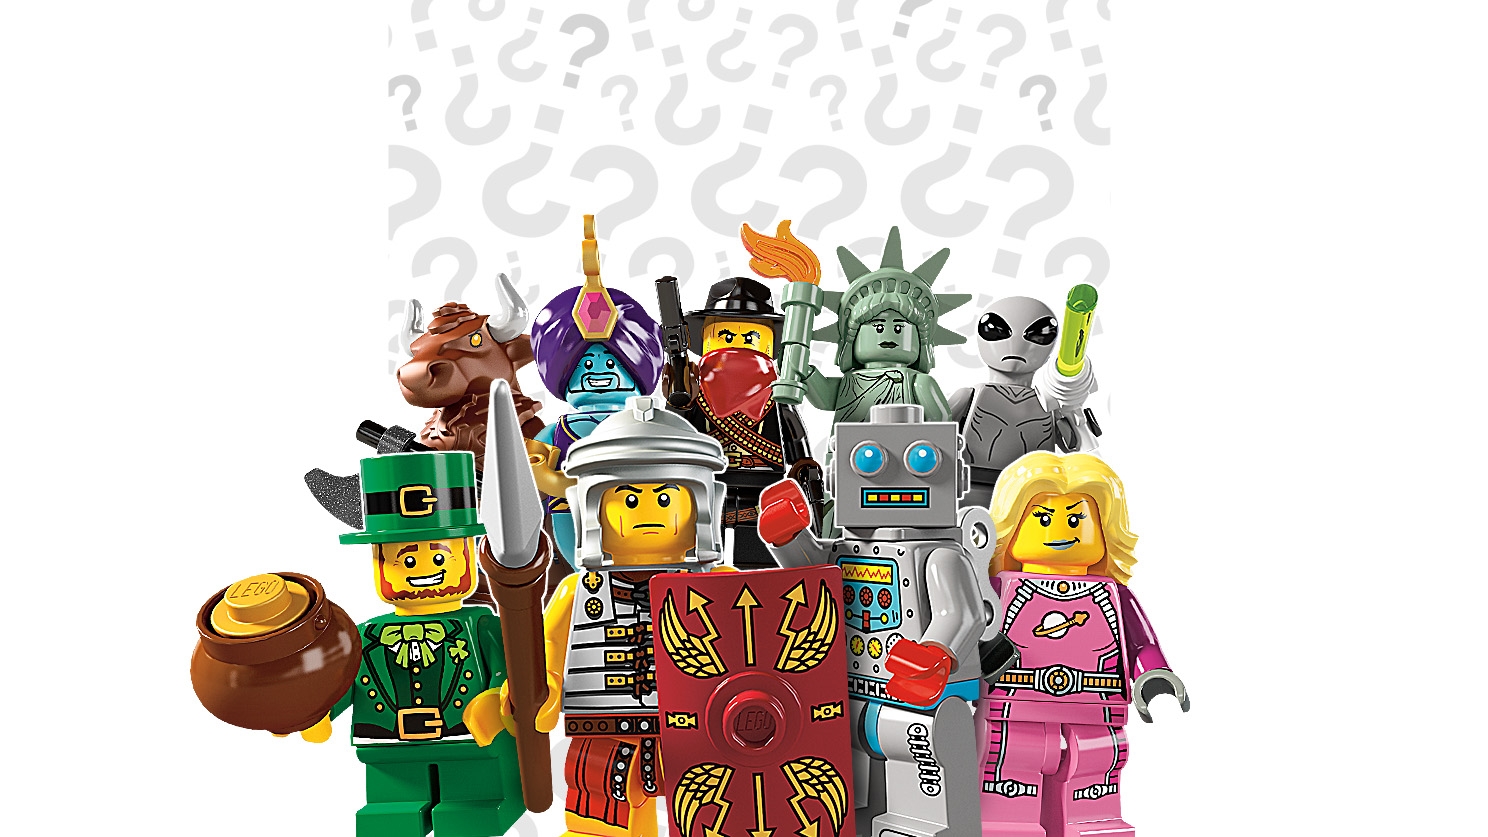 LEGO® Minifigures, 6 8827 - LEGO® Minifigures Sets - LEGO.com for kids